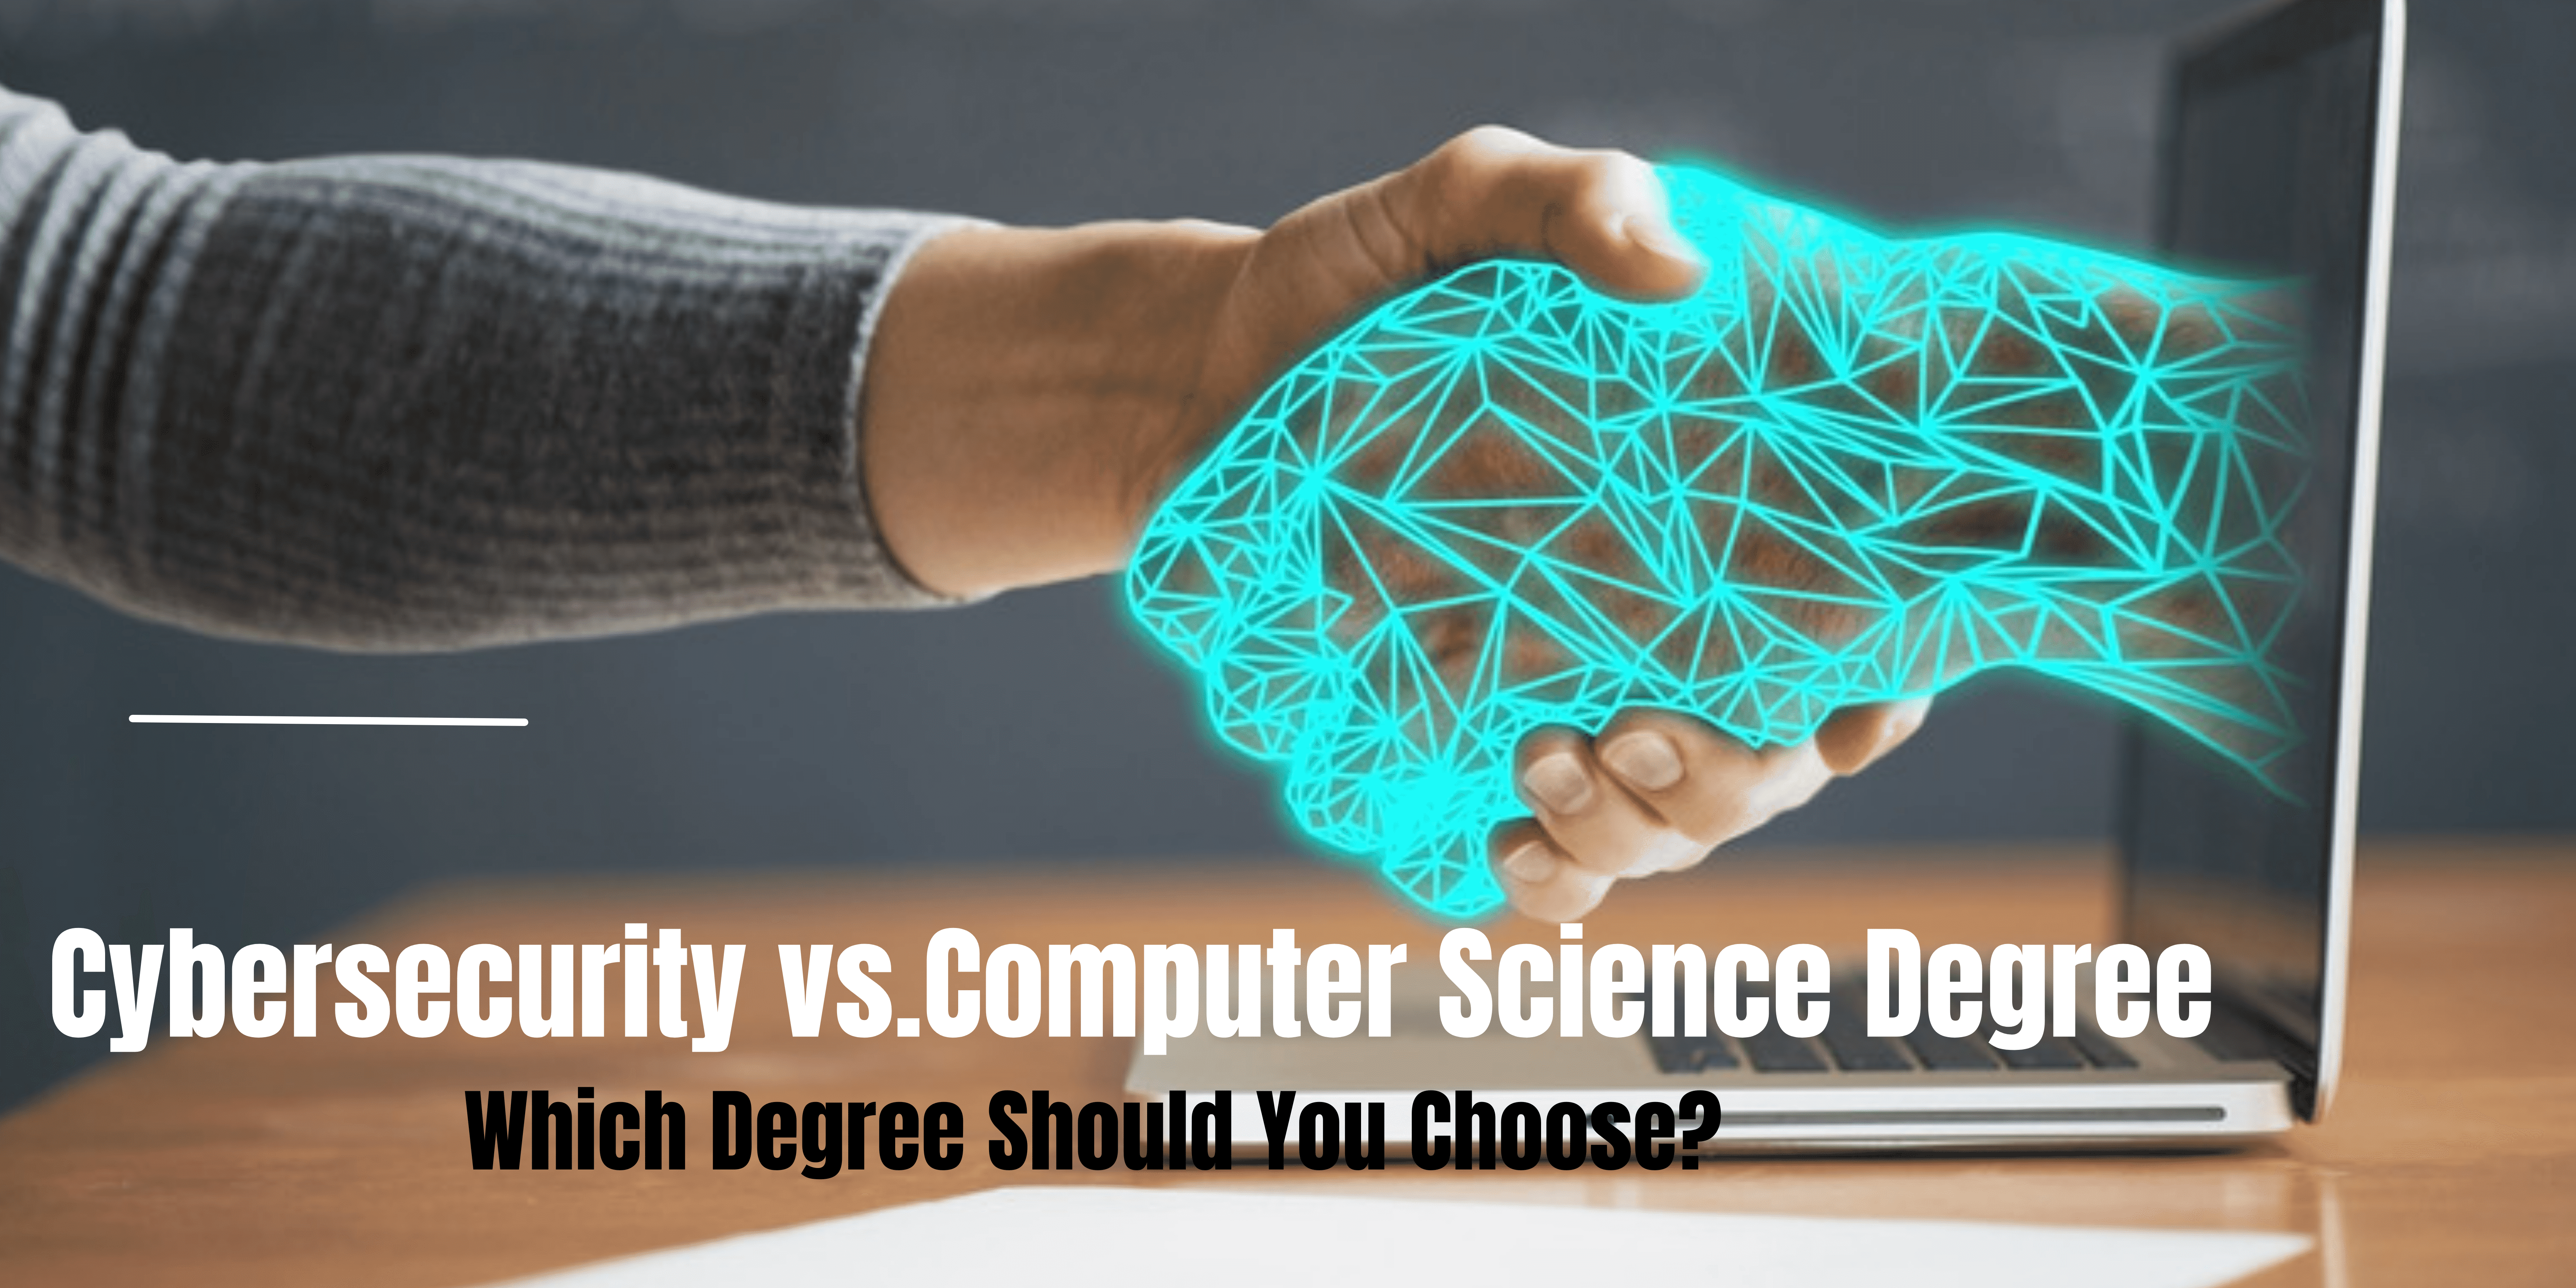 Cybersecurity vs. Computer Science Degree: Which Degree Should You Choose?